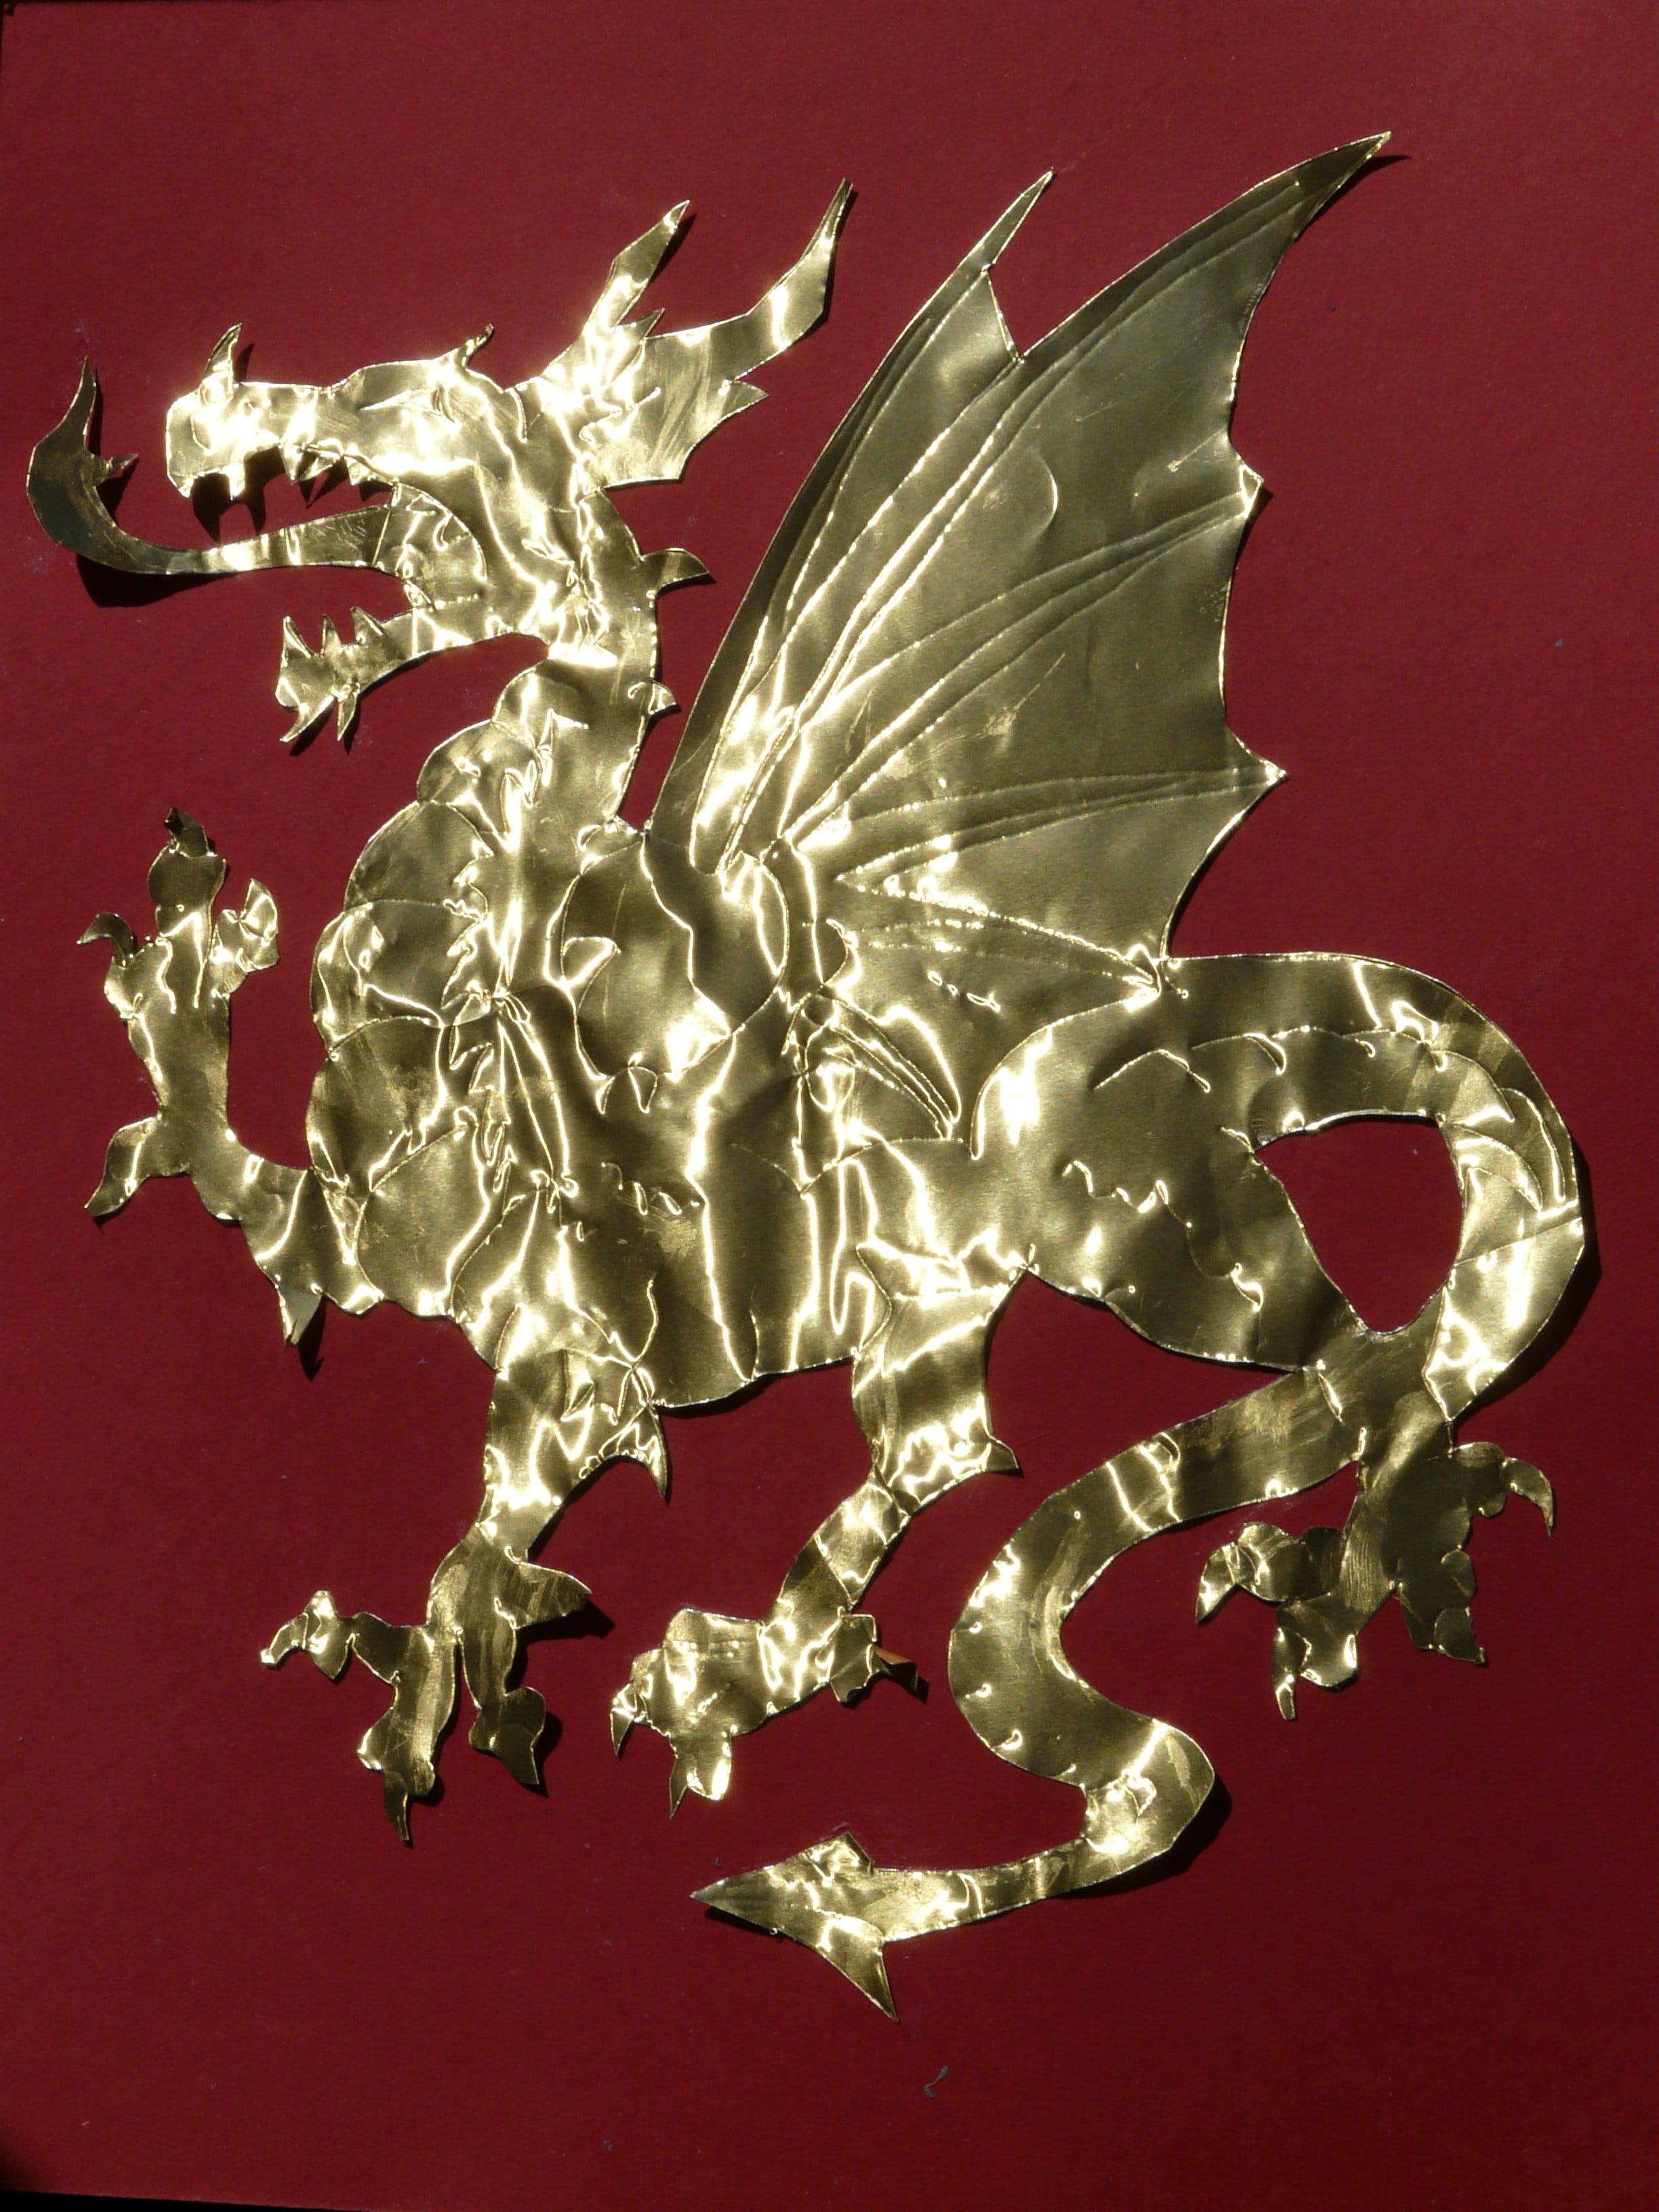 Dragon, Cute, Golden, Paper, Cut, Cut Out, claw, wing, spit fire